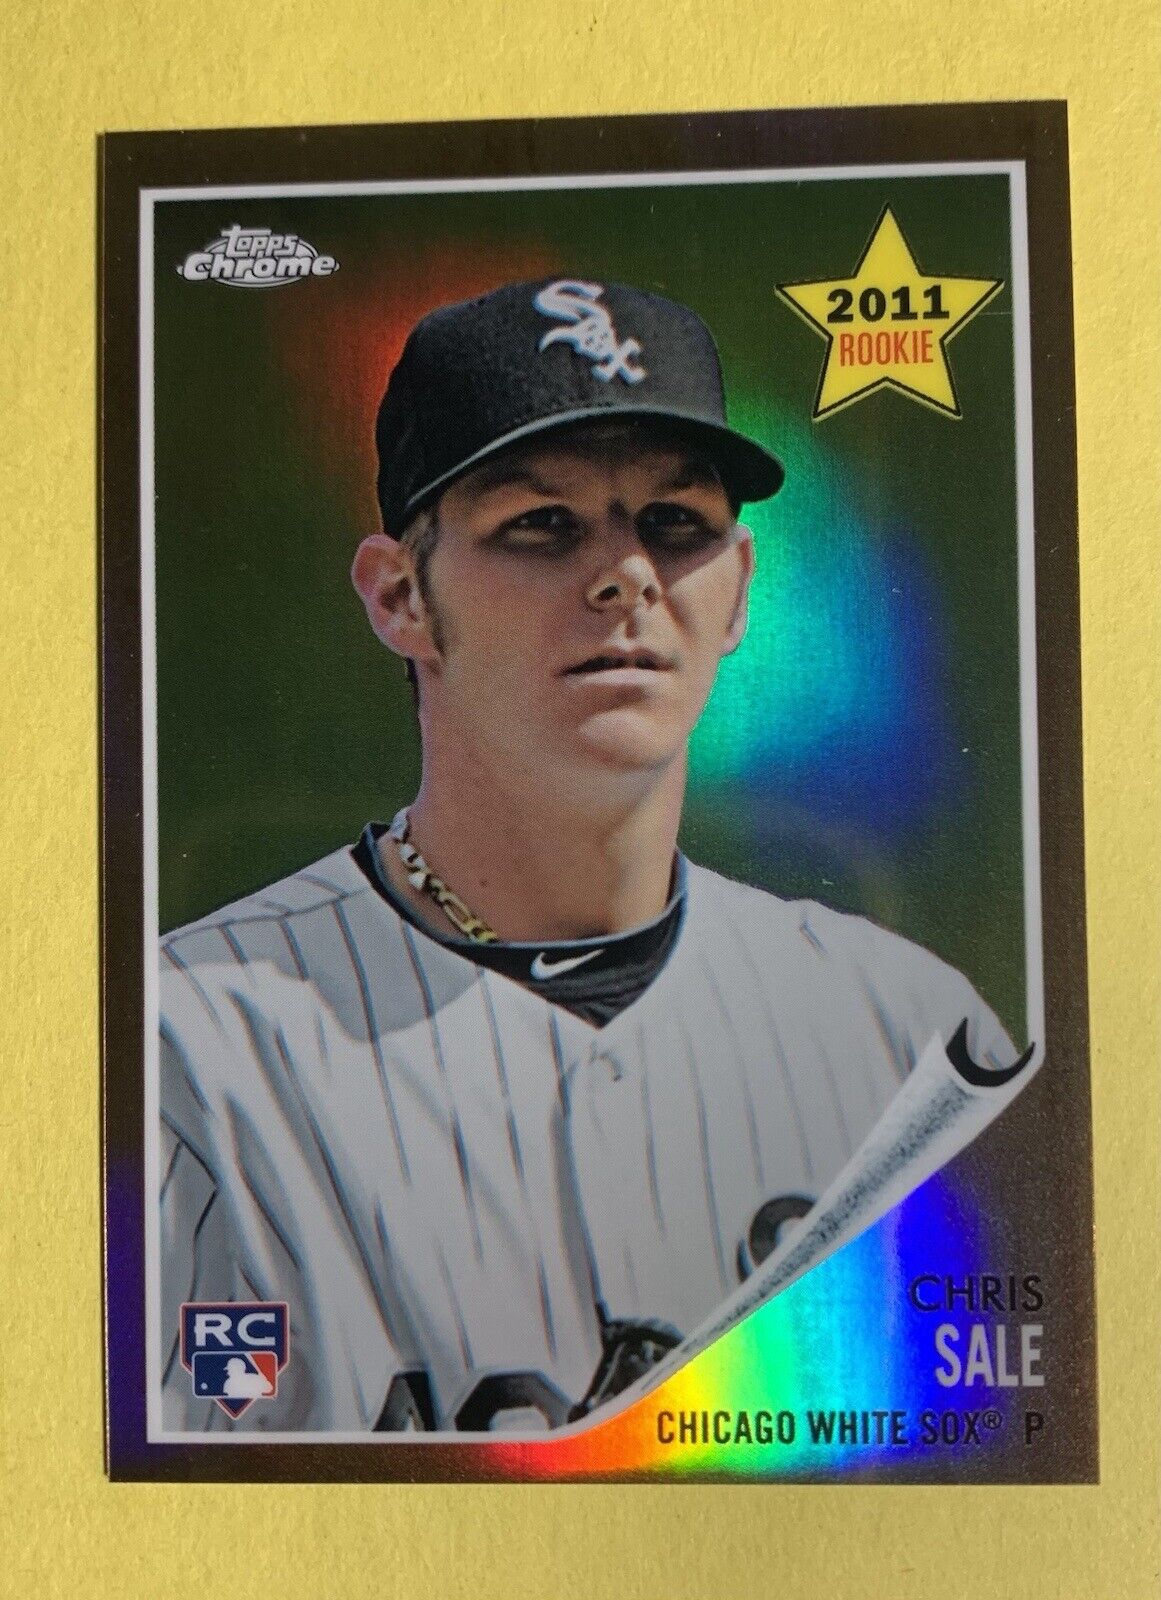 CHRIS SALE / WHITE SOX / 2011 TOPPS HERITAGE "CHROME" ROOKIE CARD "REFRACTOR"